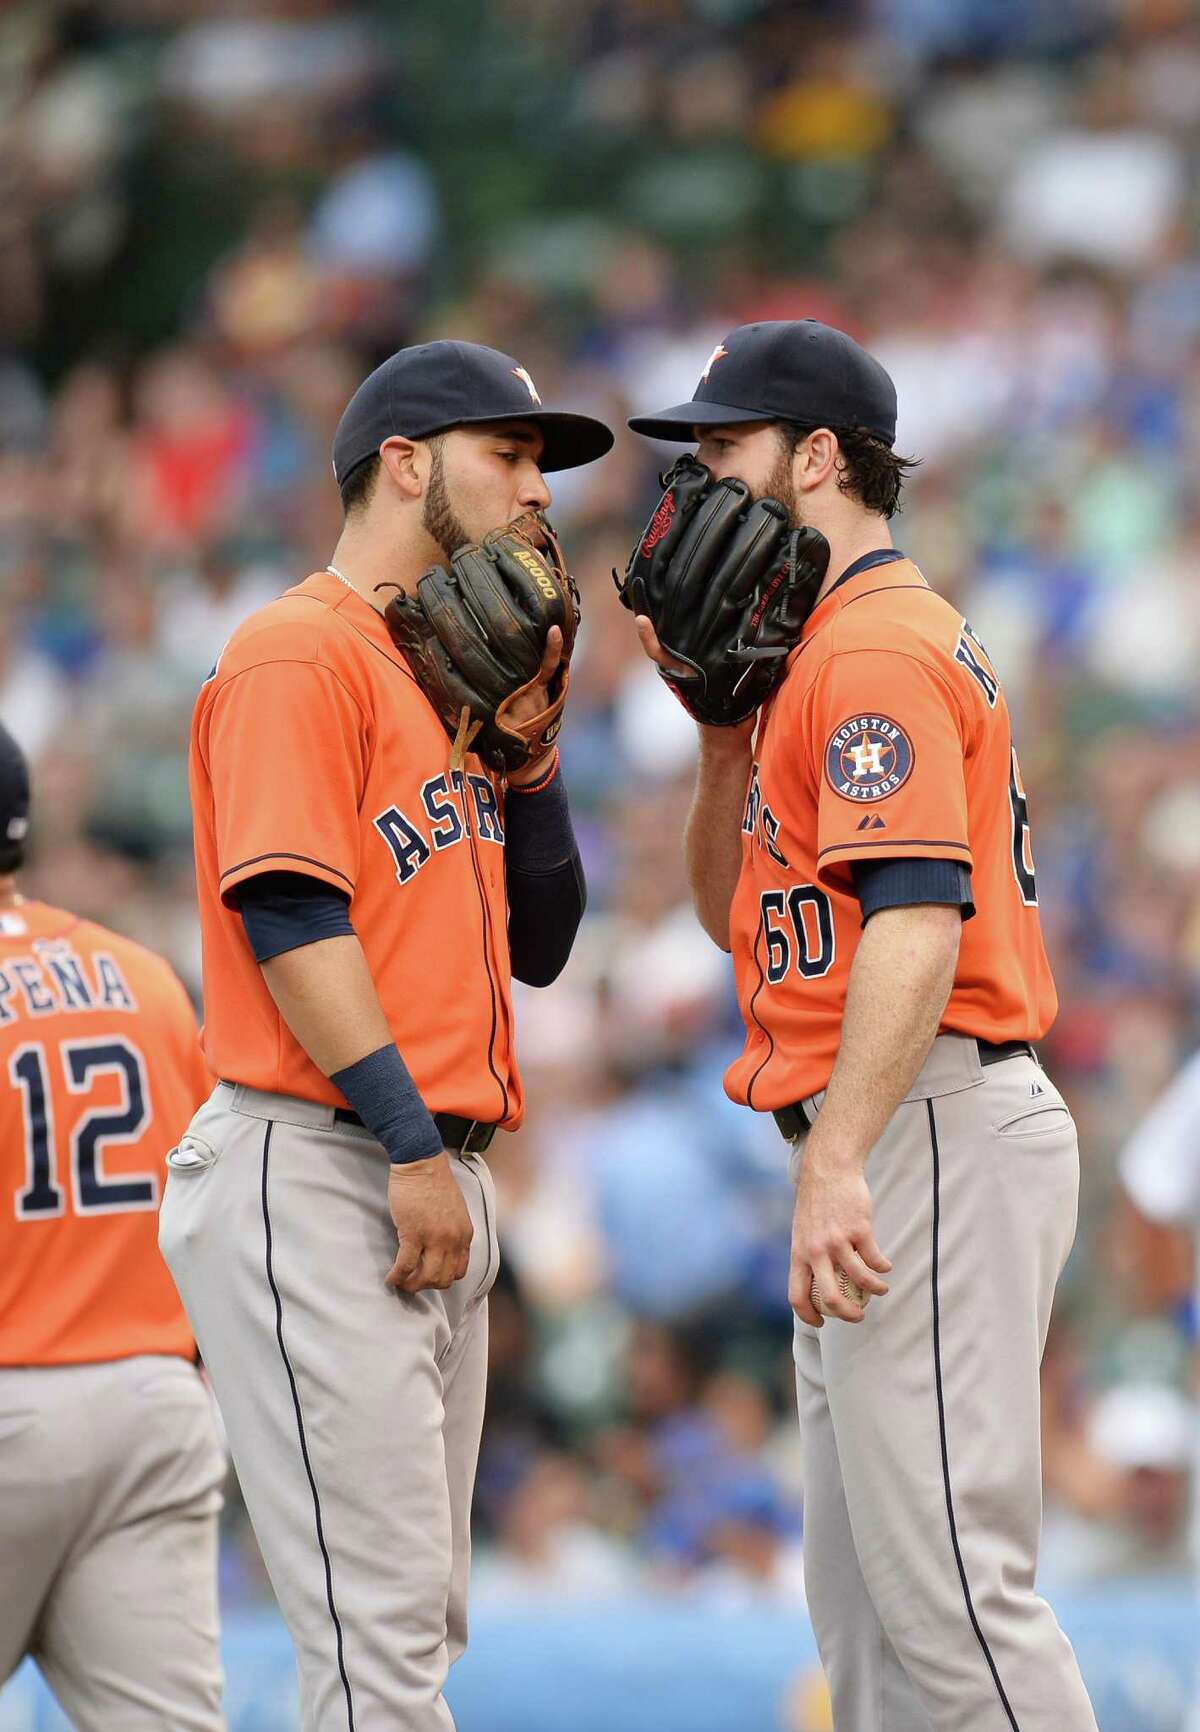 Proving you can't be too careful these days, Astros shortstop Marwin Gonzalez, left, and starter Dallas Keuchel try to keep their mound conversation private during the third inning.